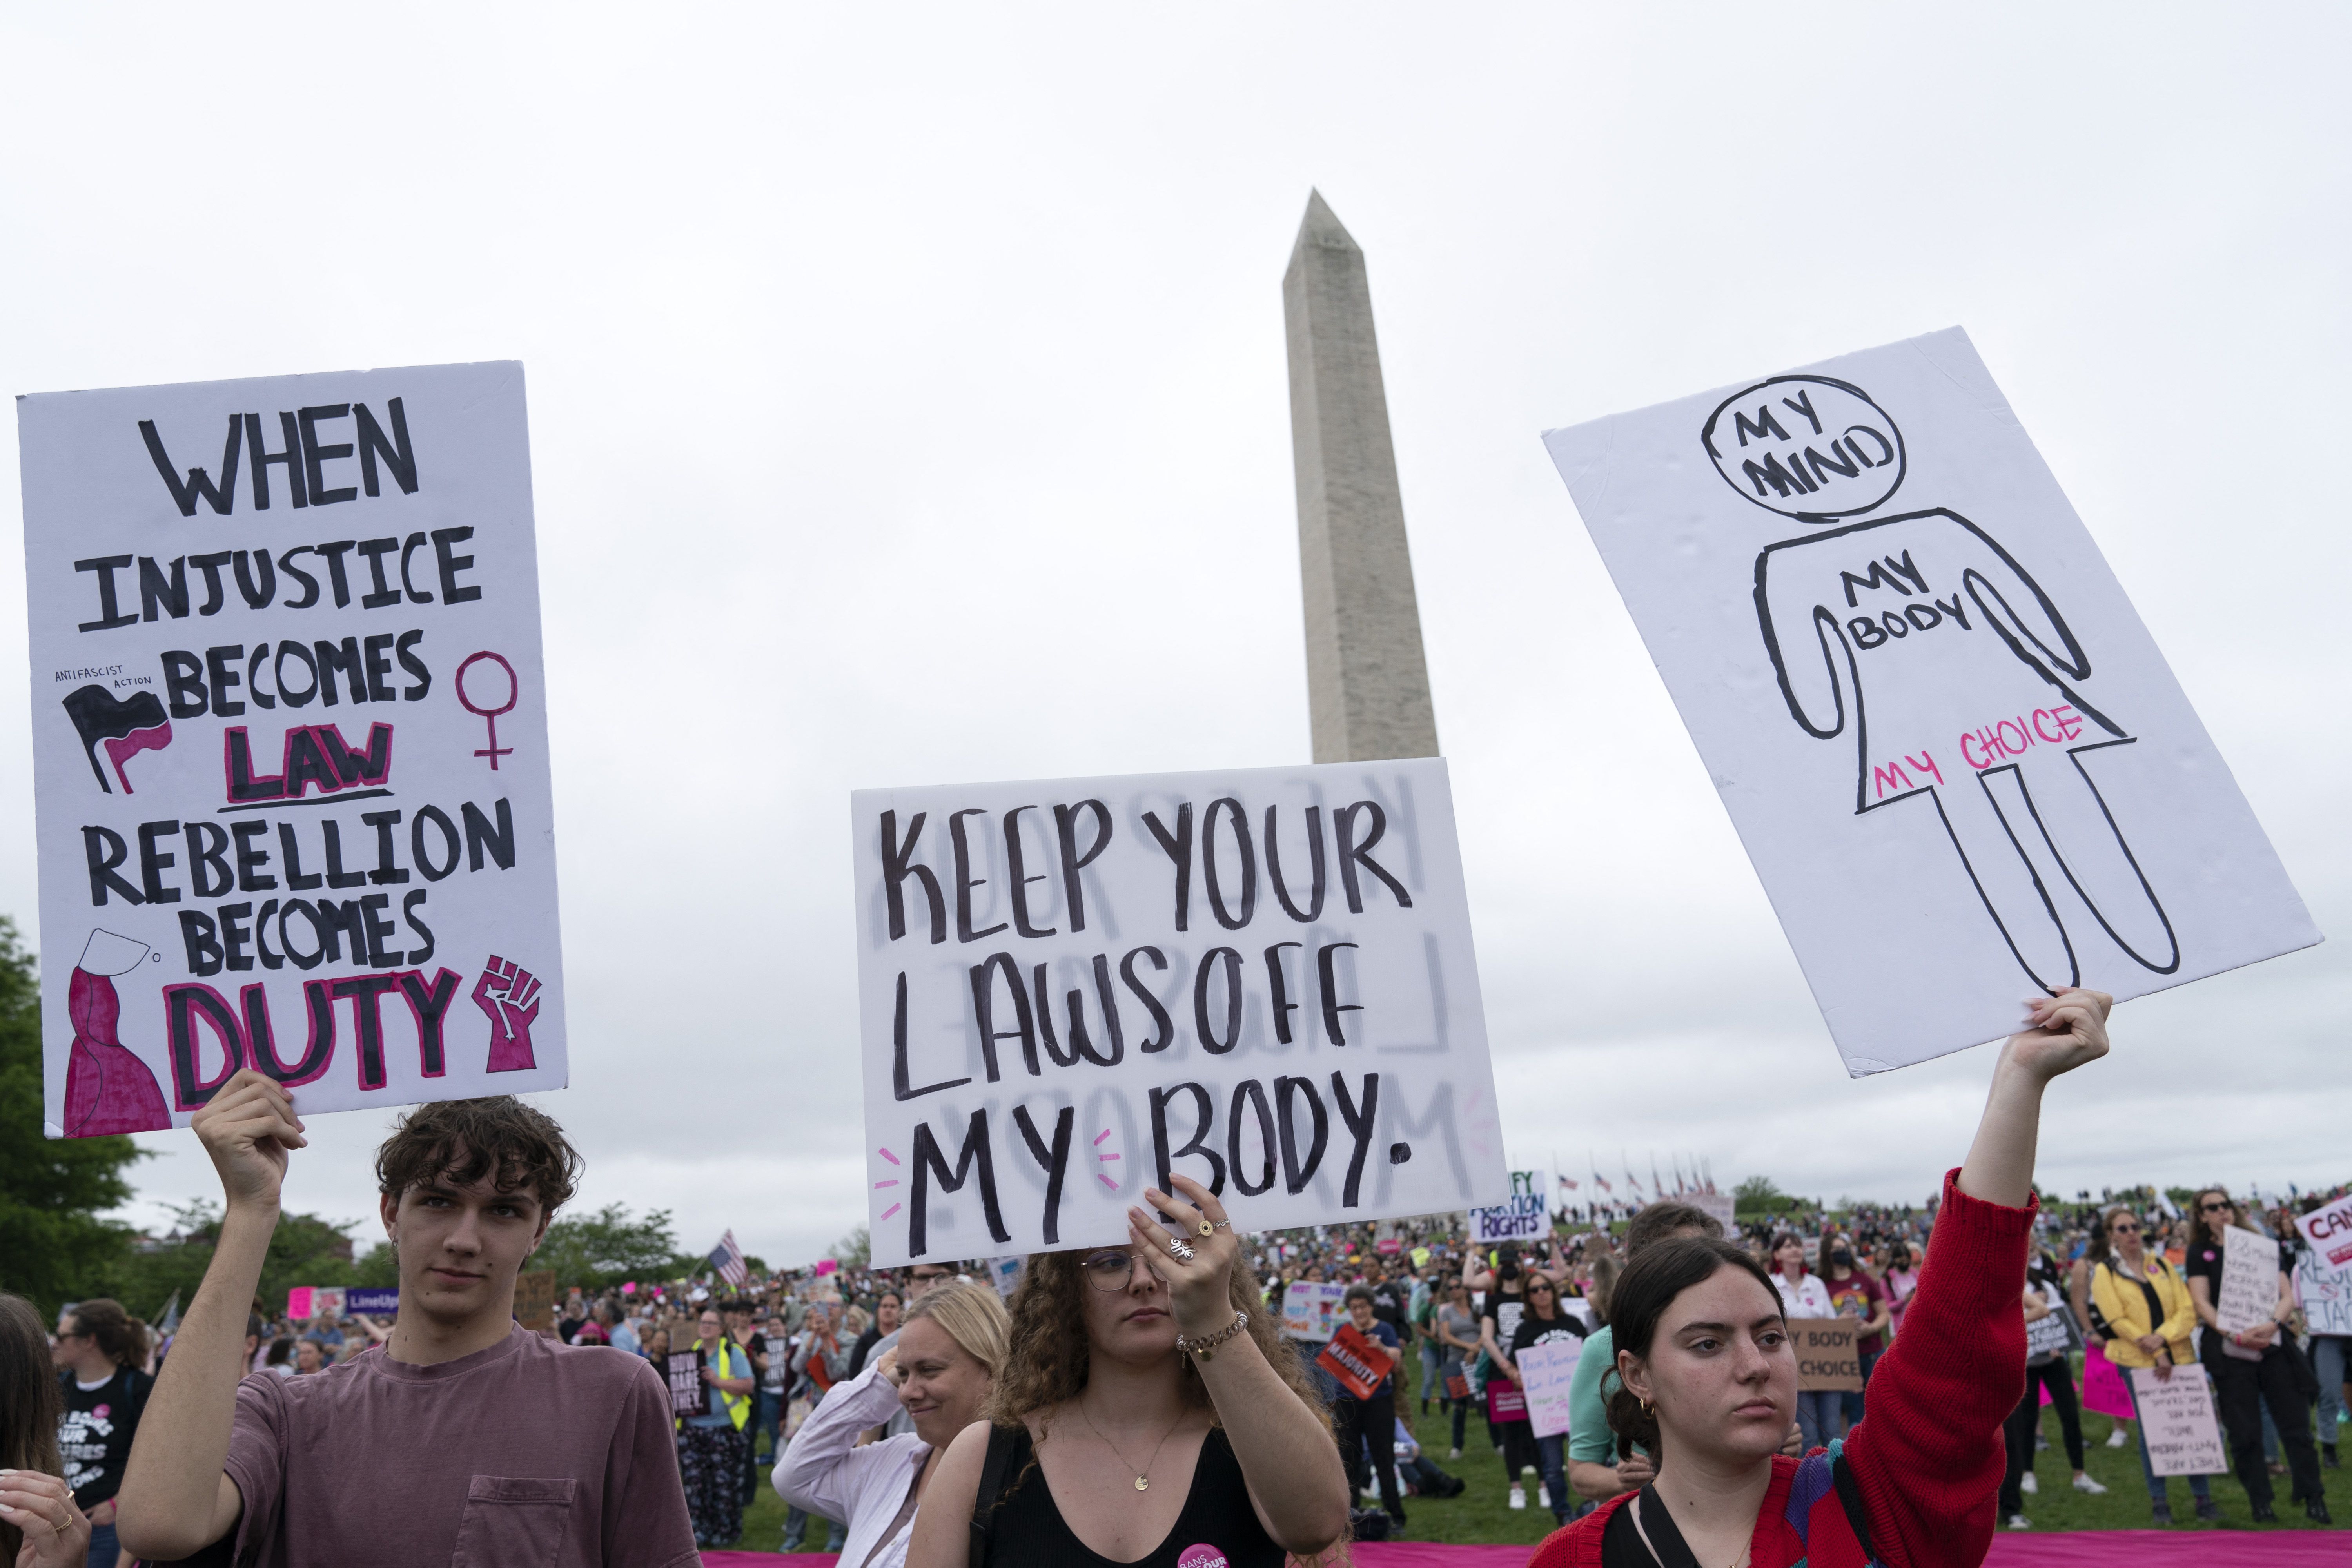 Abortion rights activists demonstrating at the Washington Monument in Washington, D.C., on May 14.